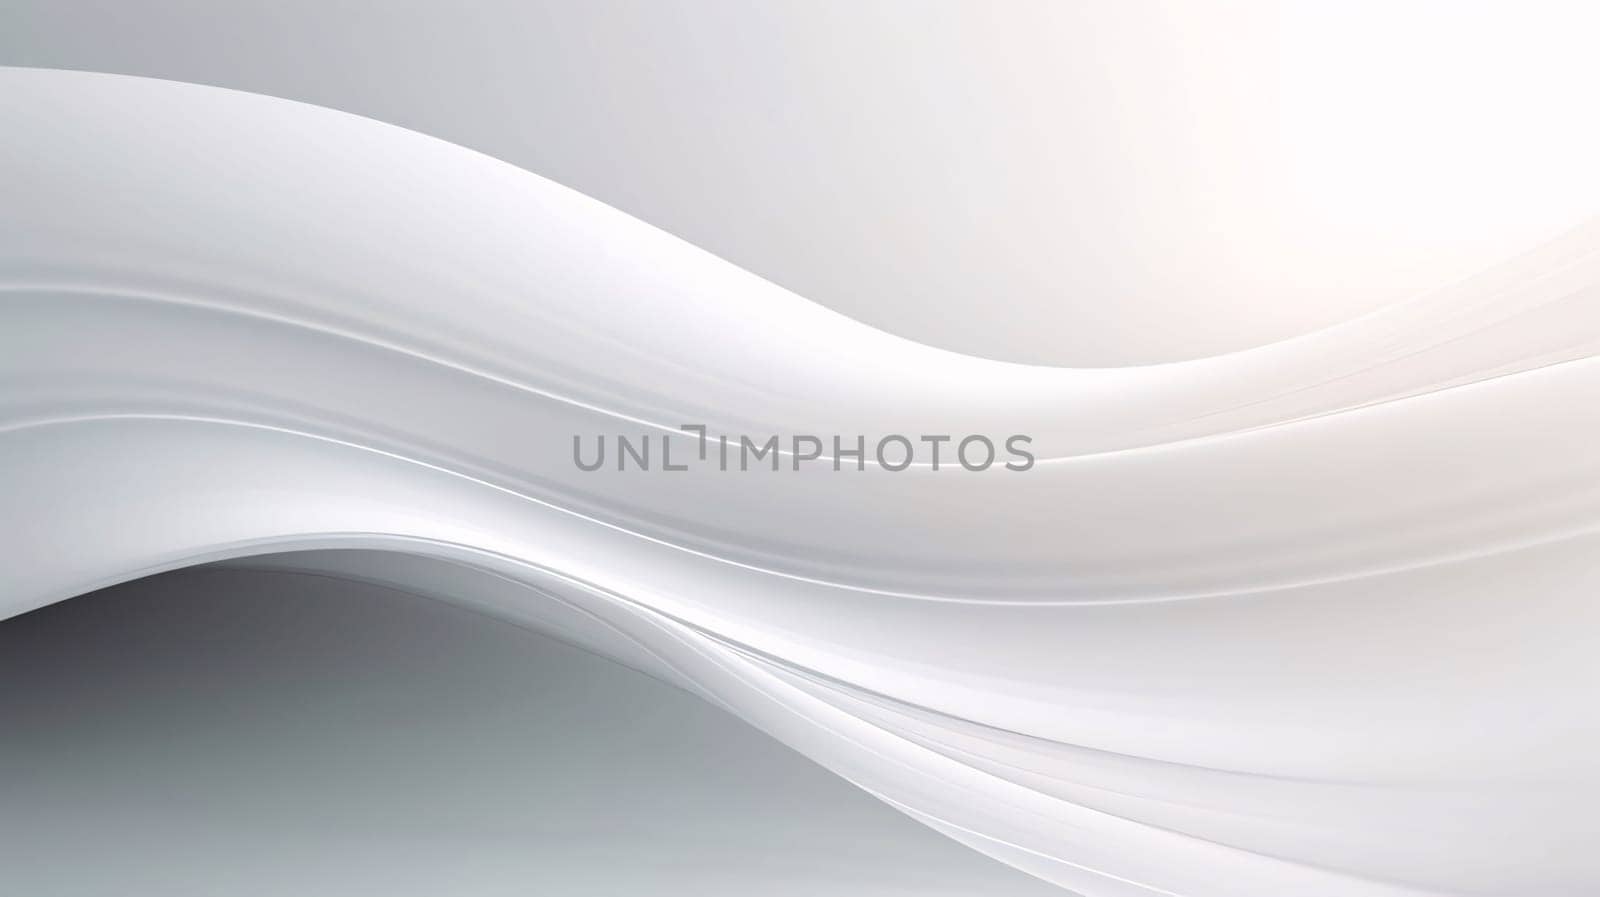 Abstract background design: abstract white background with smooth lines in it - 3d rendering